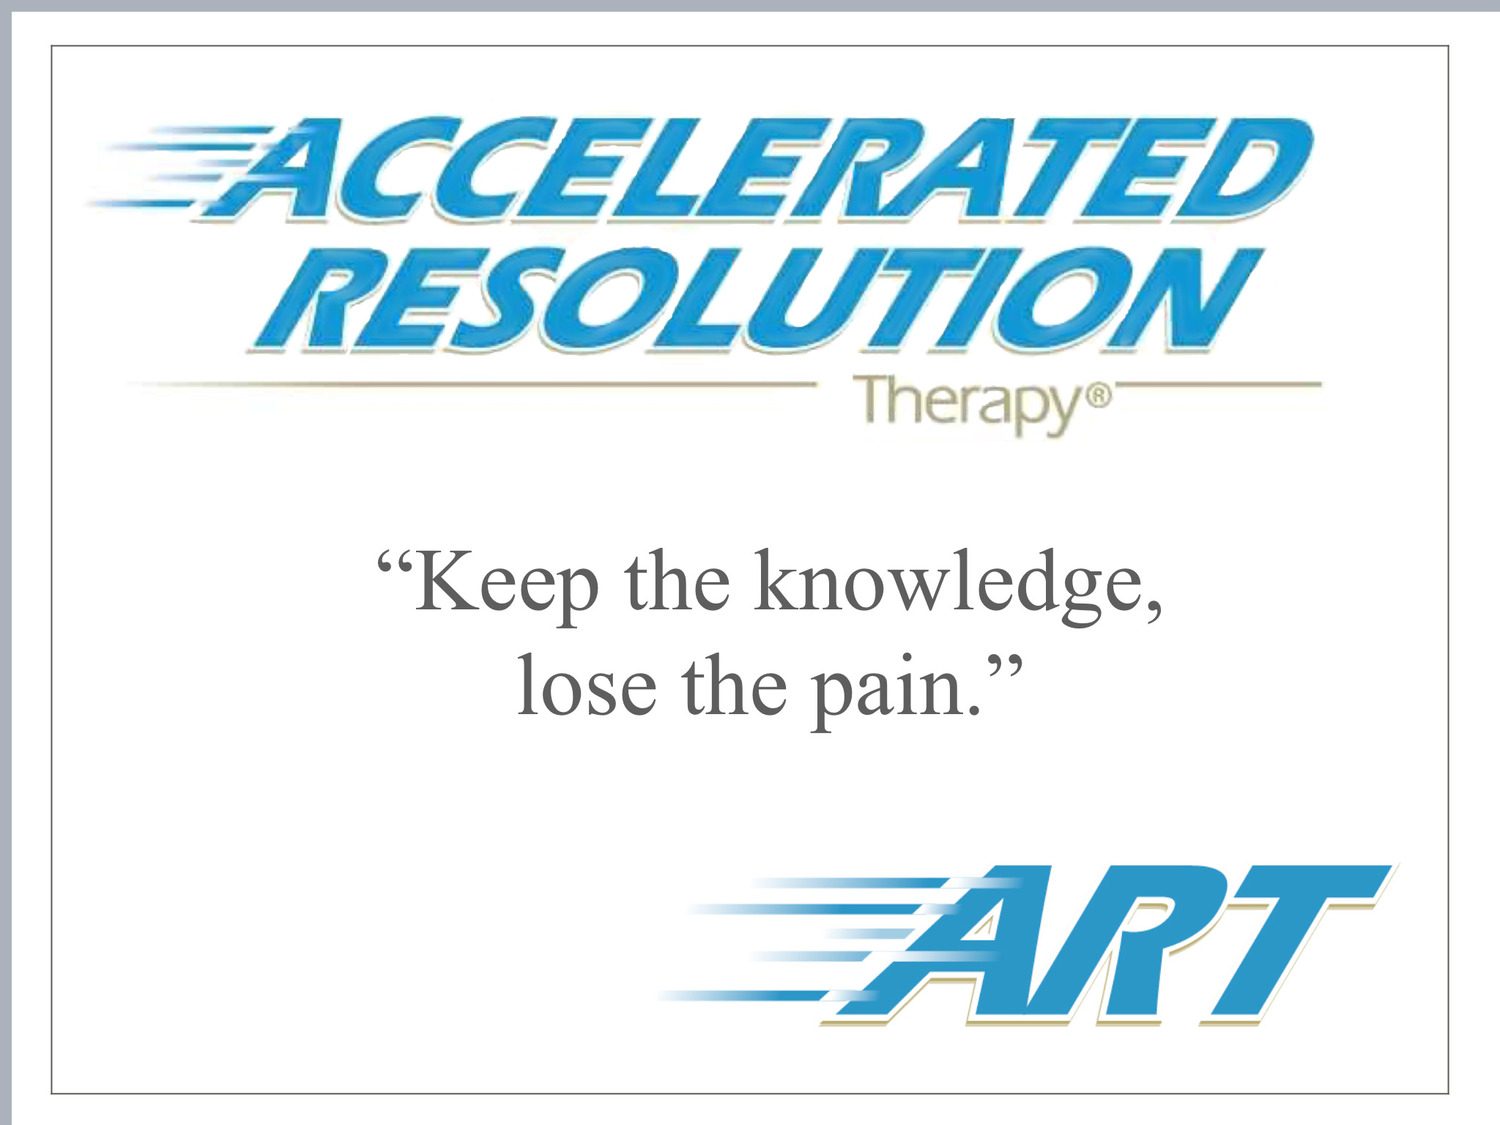 Accelerated Resolution Therapy